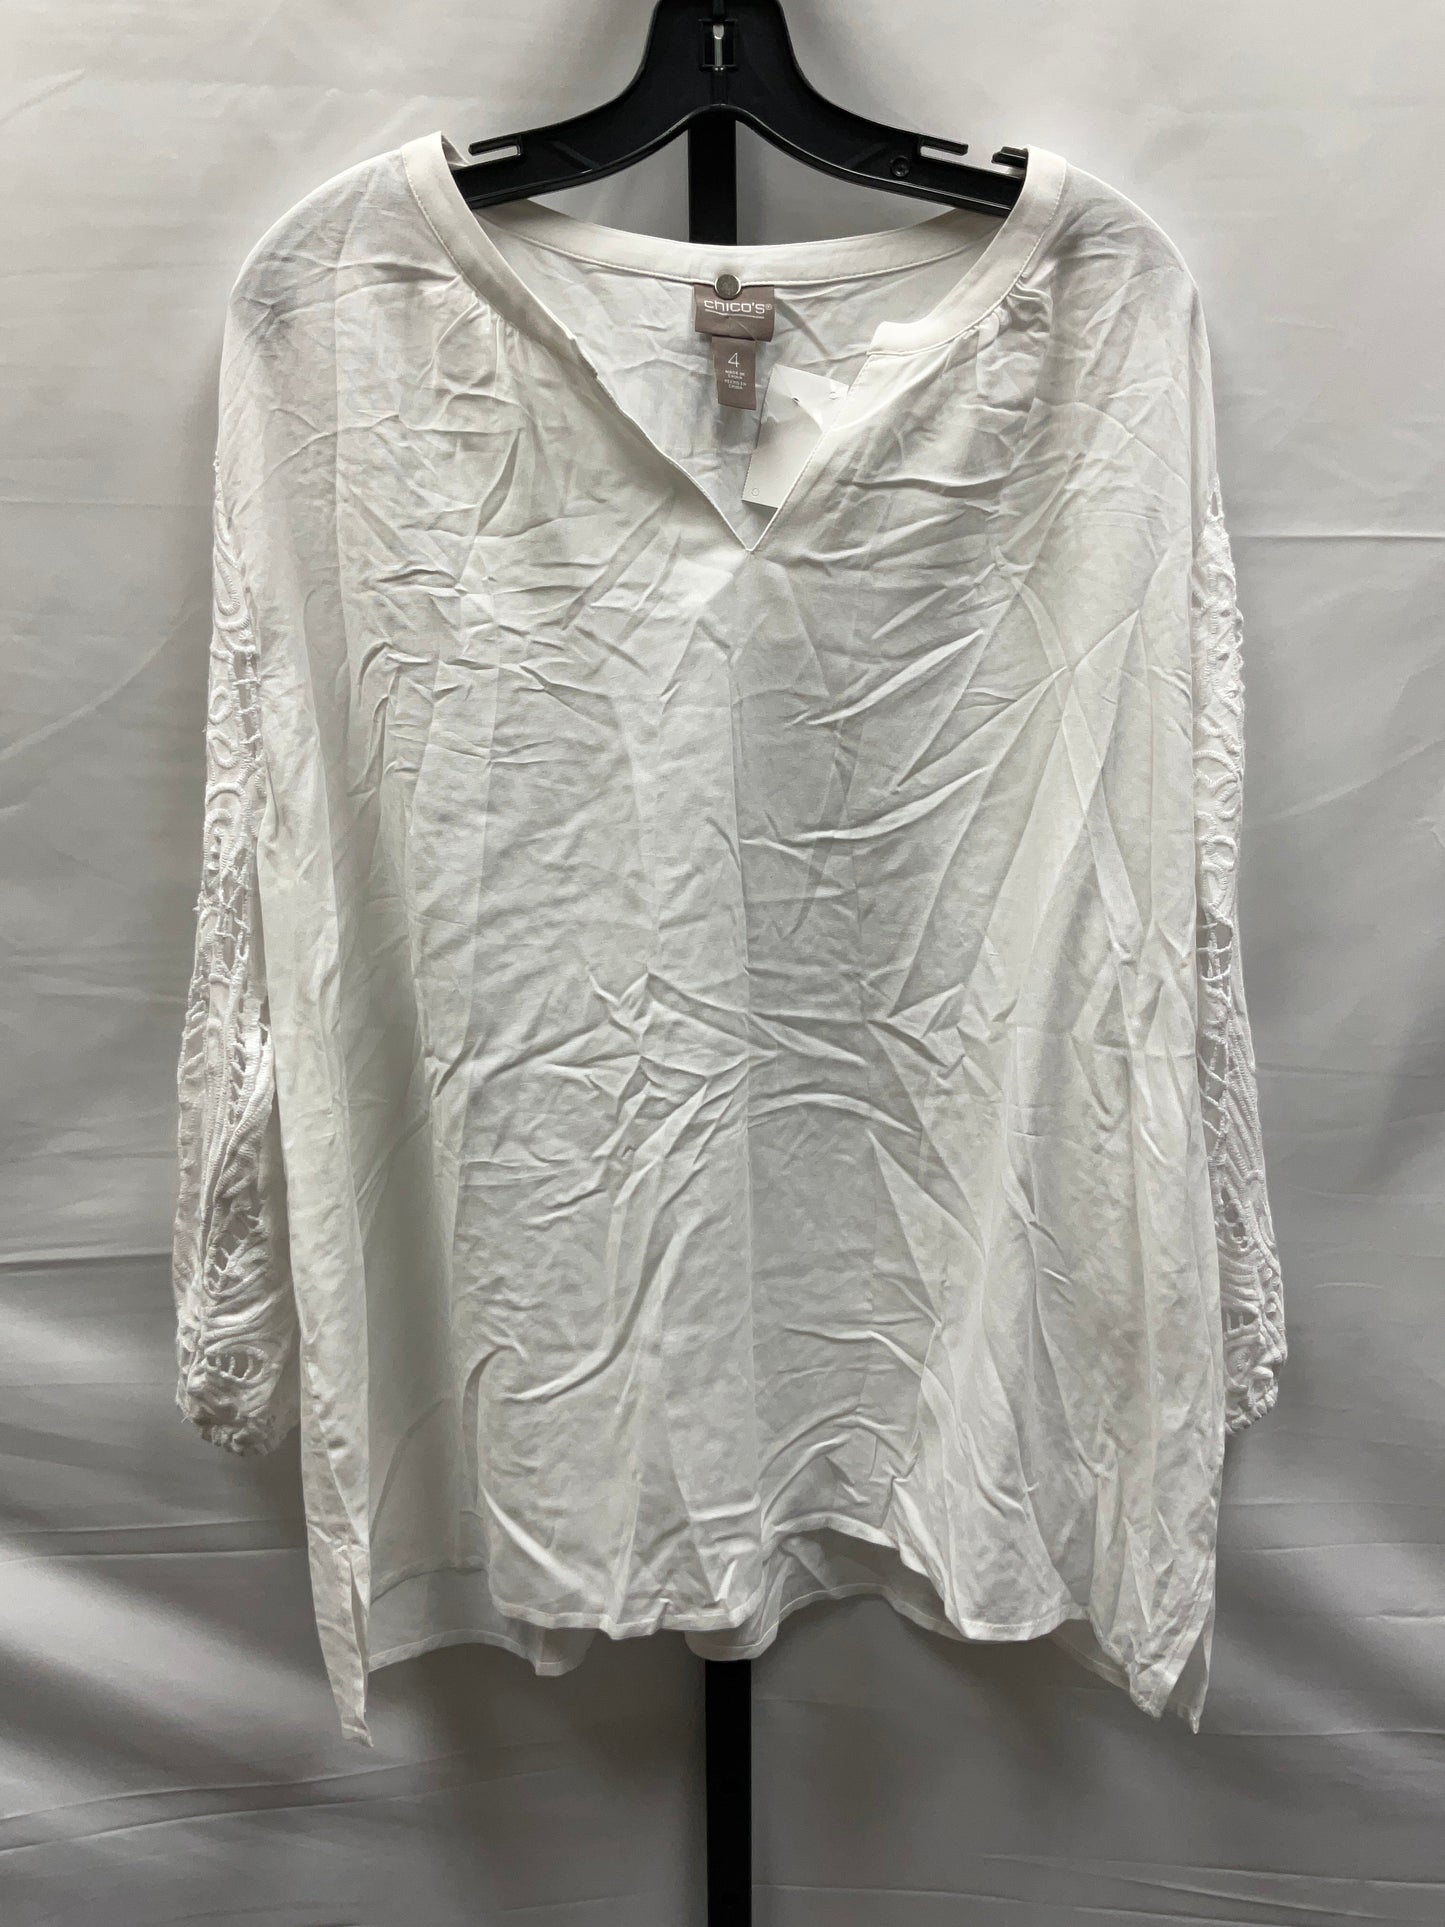 White Top Long Sleeve Chicos, Size 2x